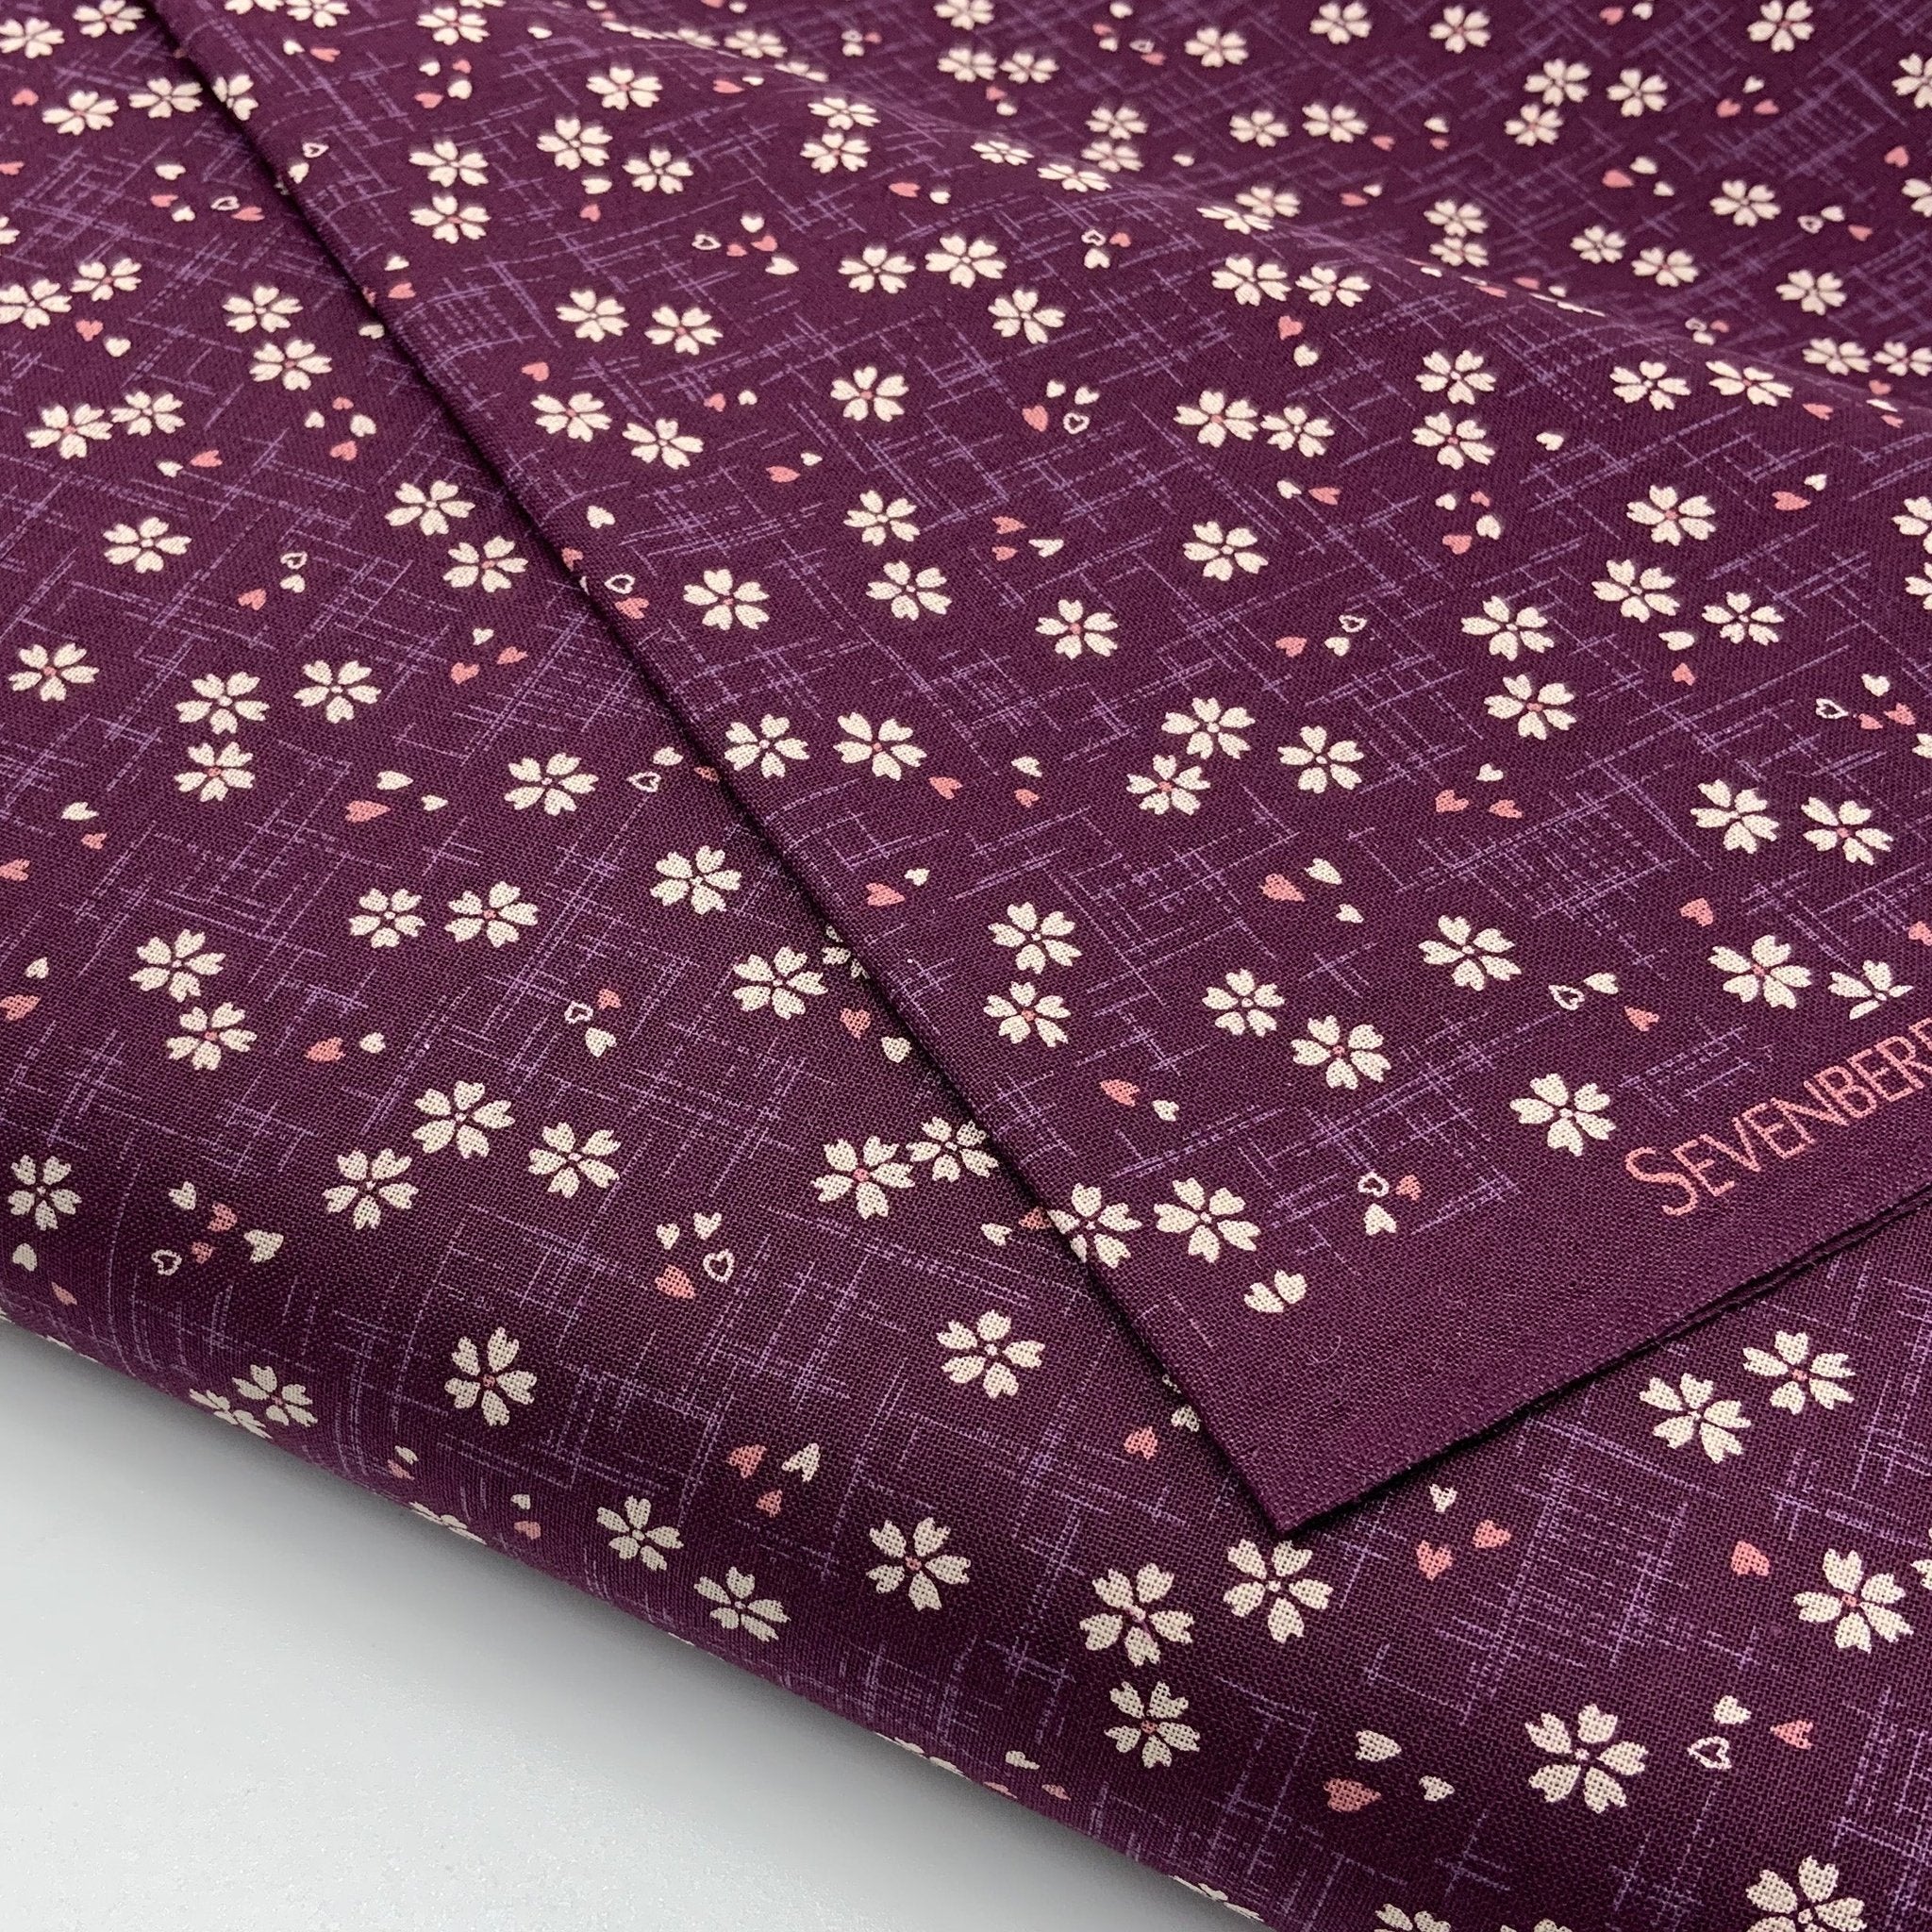 Japanese Cotton Sheeting Print - Cherry Blossom with Falling Petals Purple